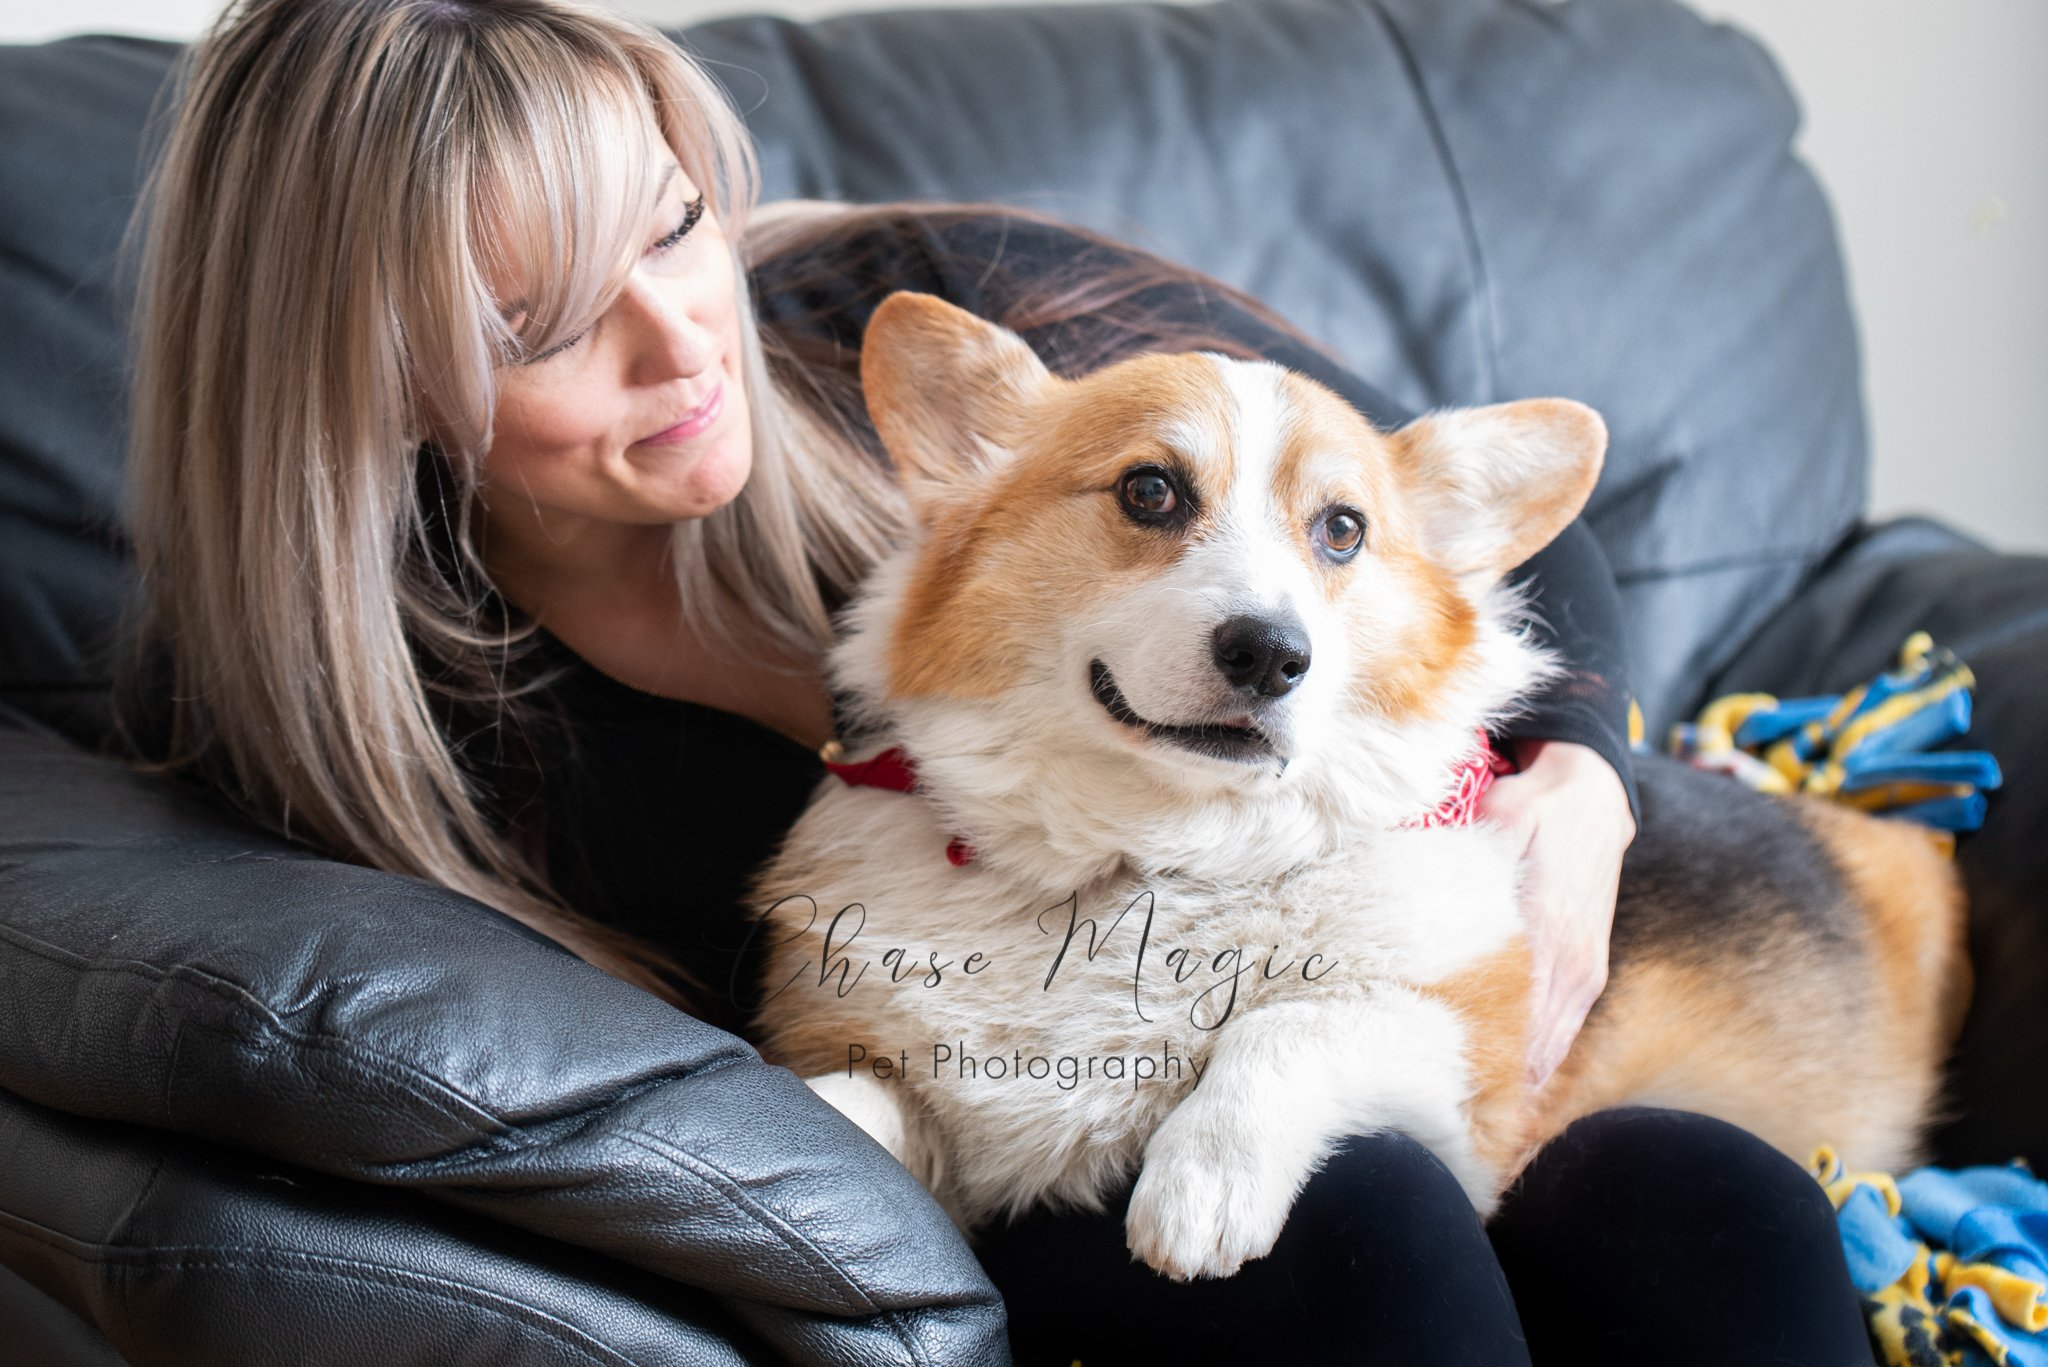 Fluffy Corgi cuddling with its owner on the sofa couch